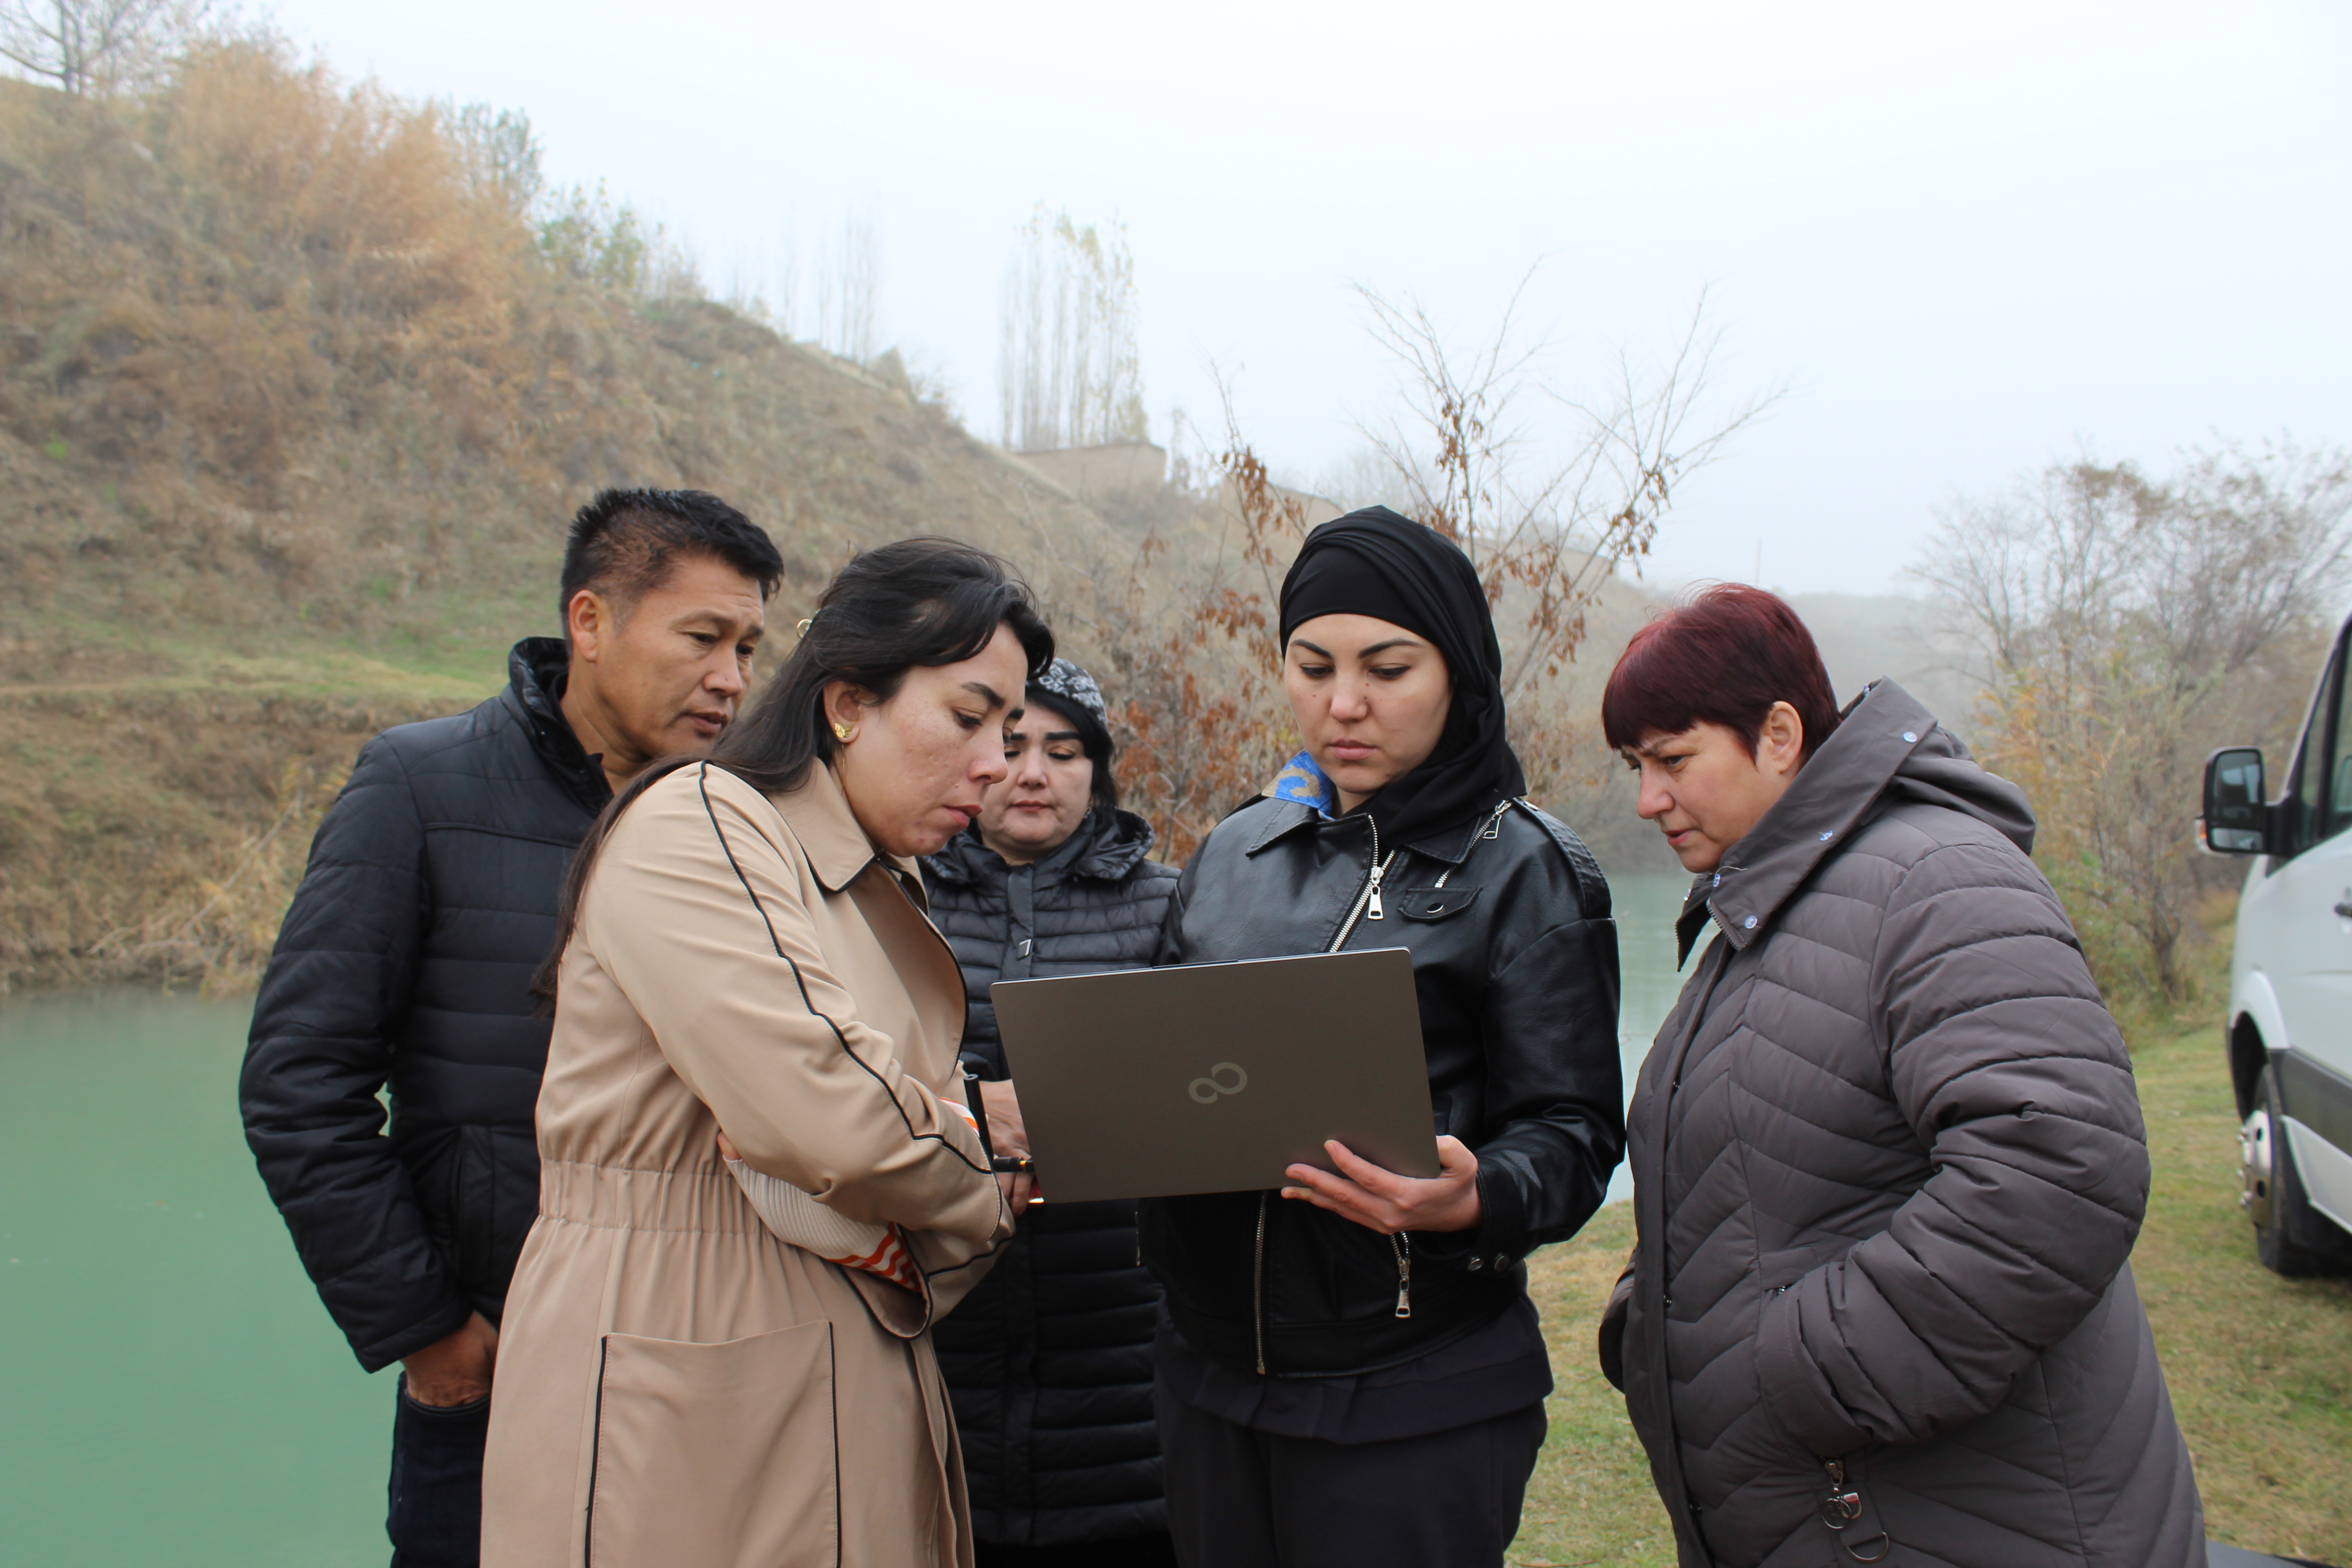 Training participants are learning on the spot - by the river